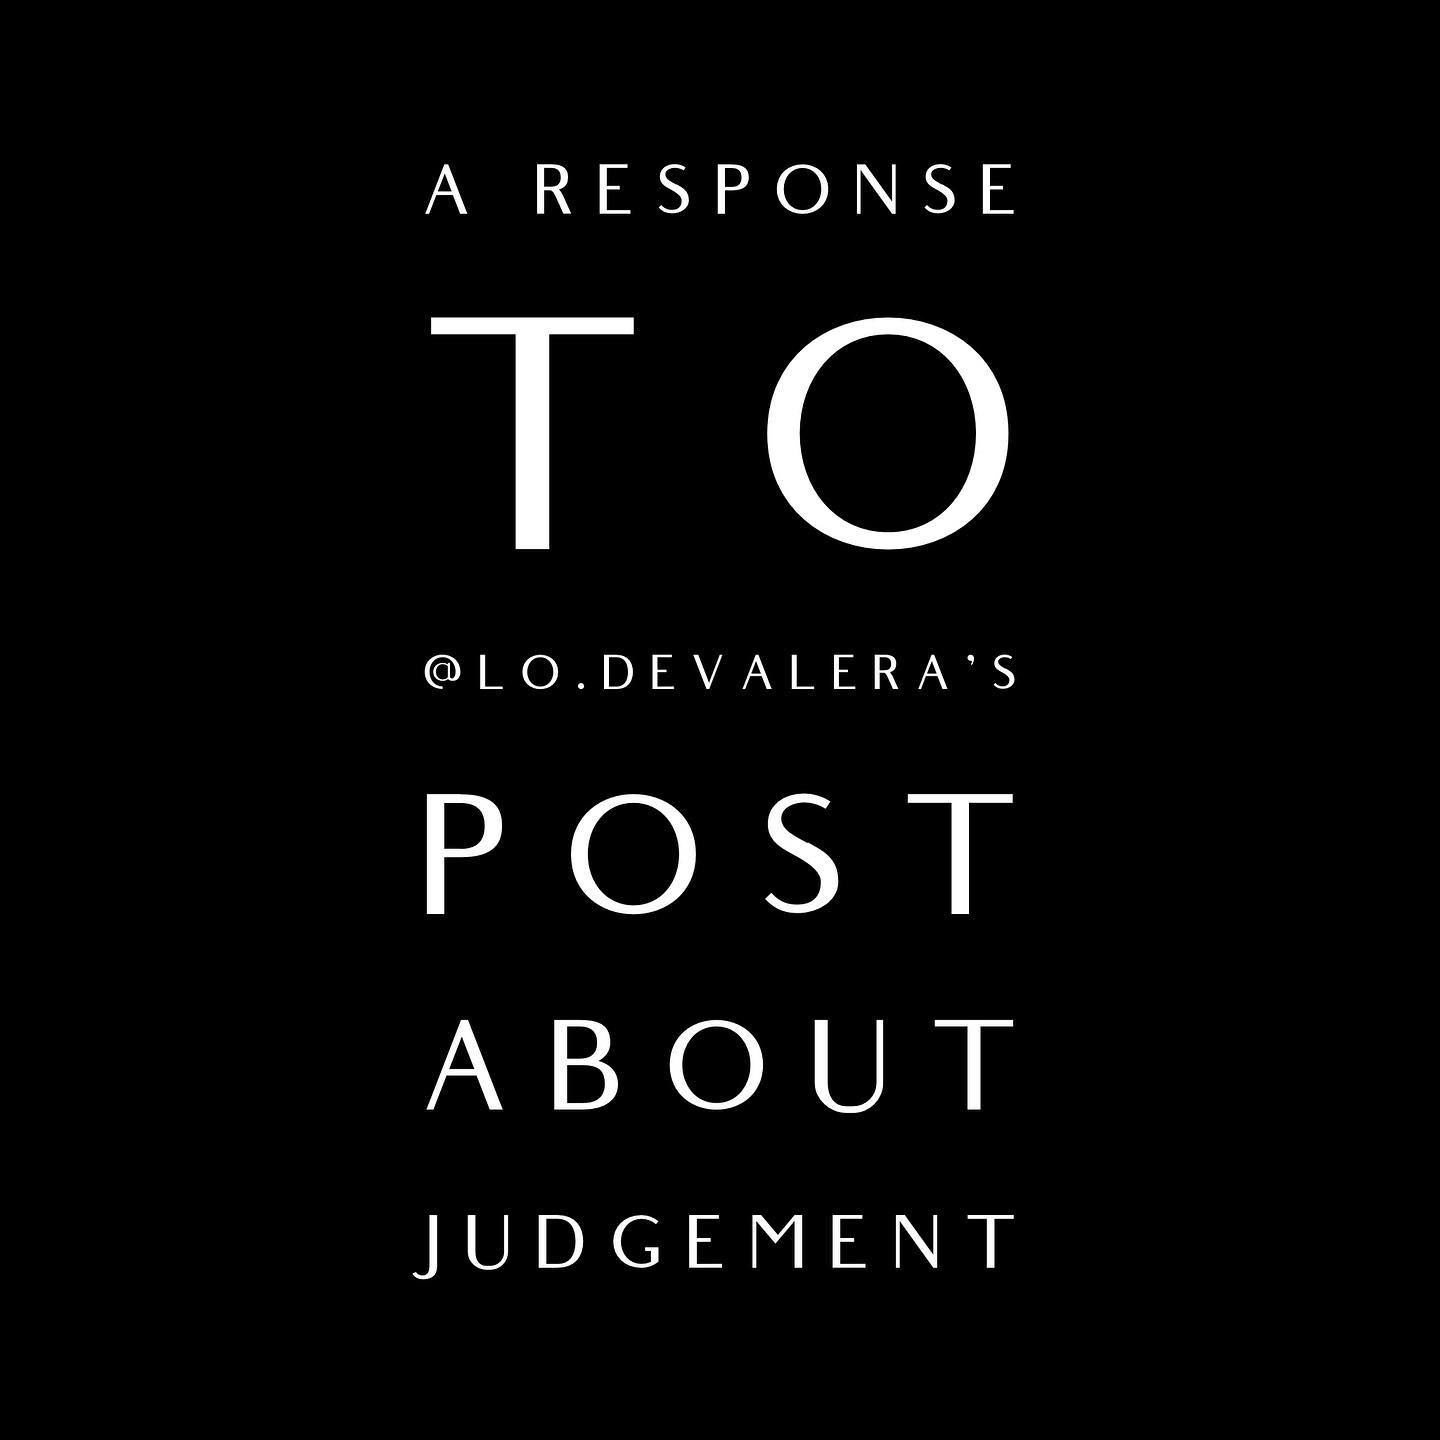 A response to @lo.devalera's post about judgement